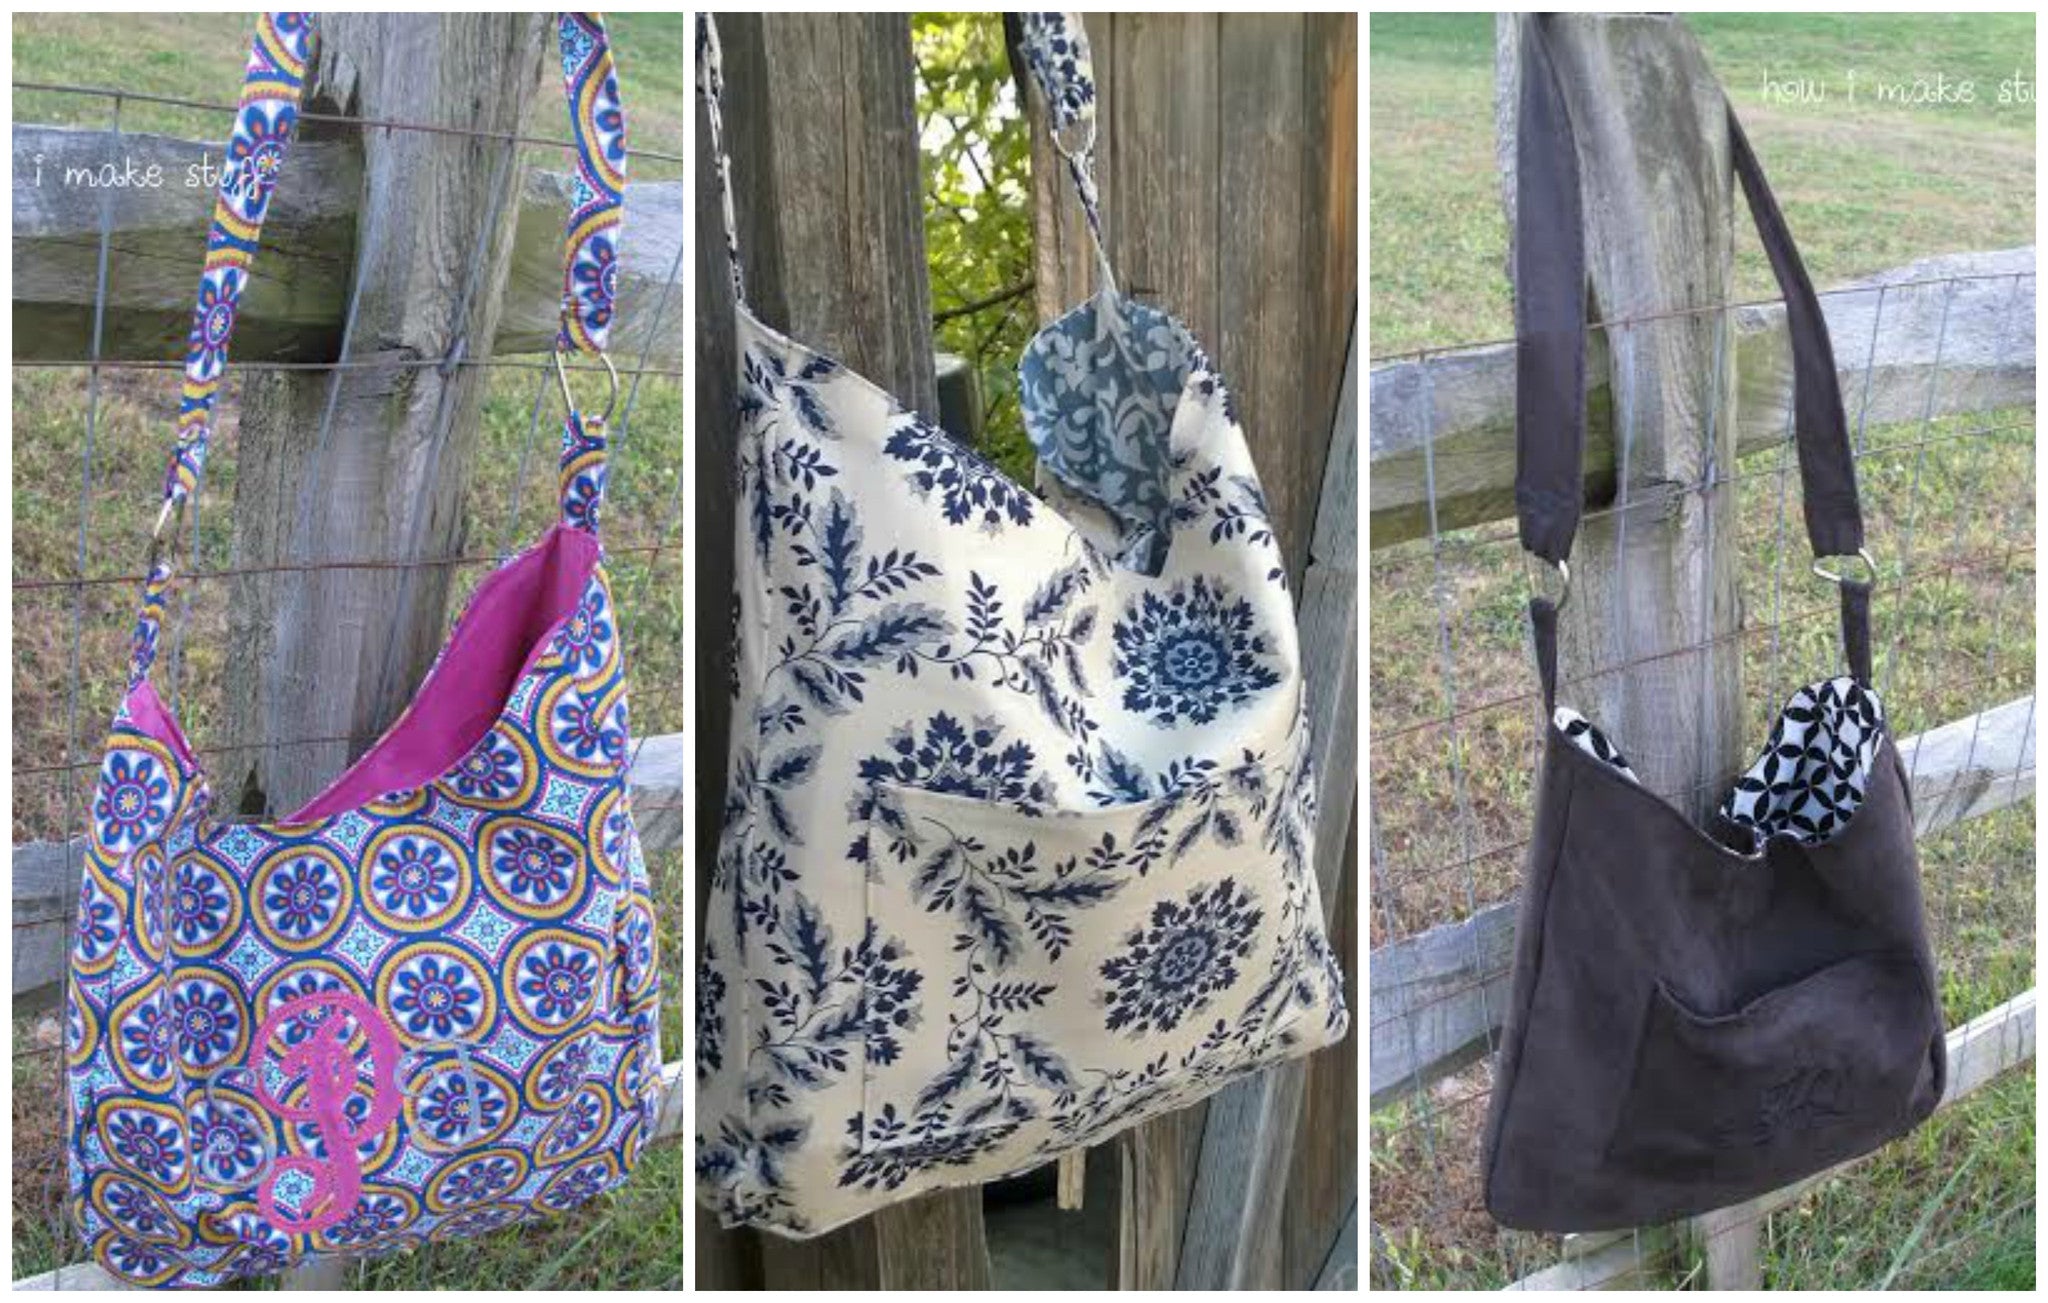 The Slouch Bag sewing pattern